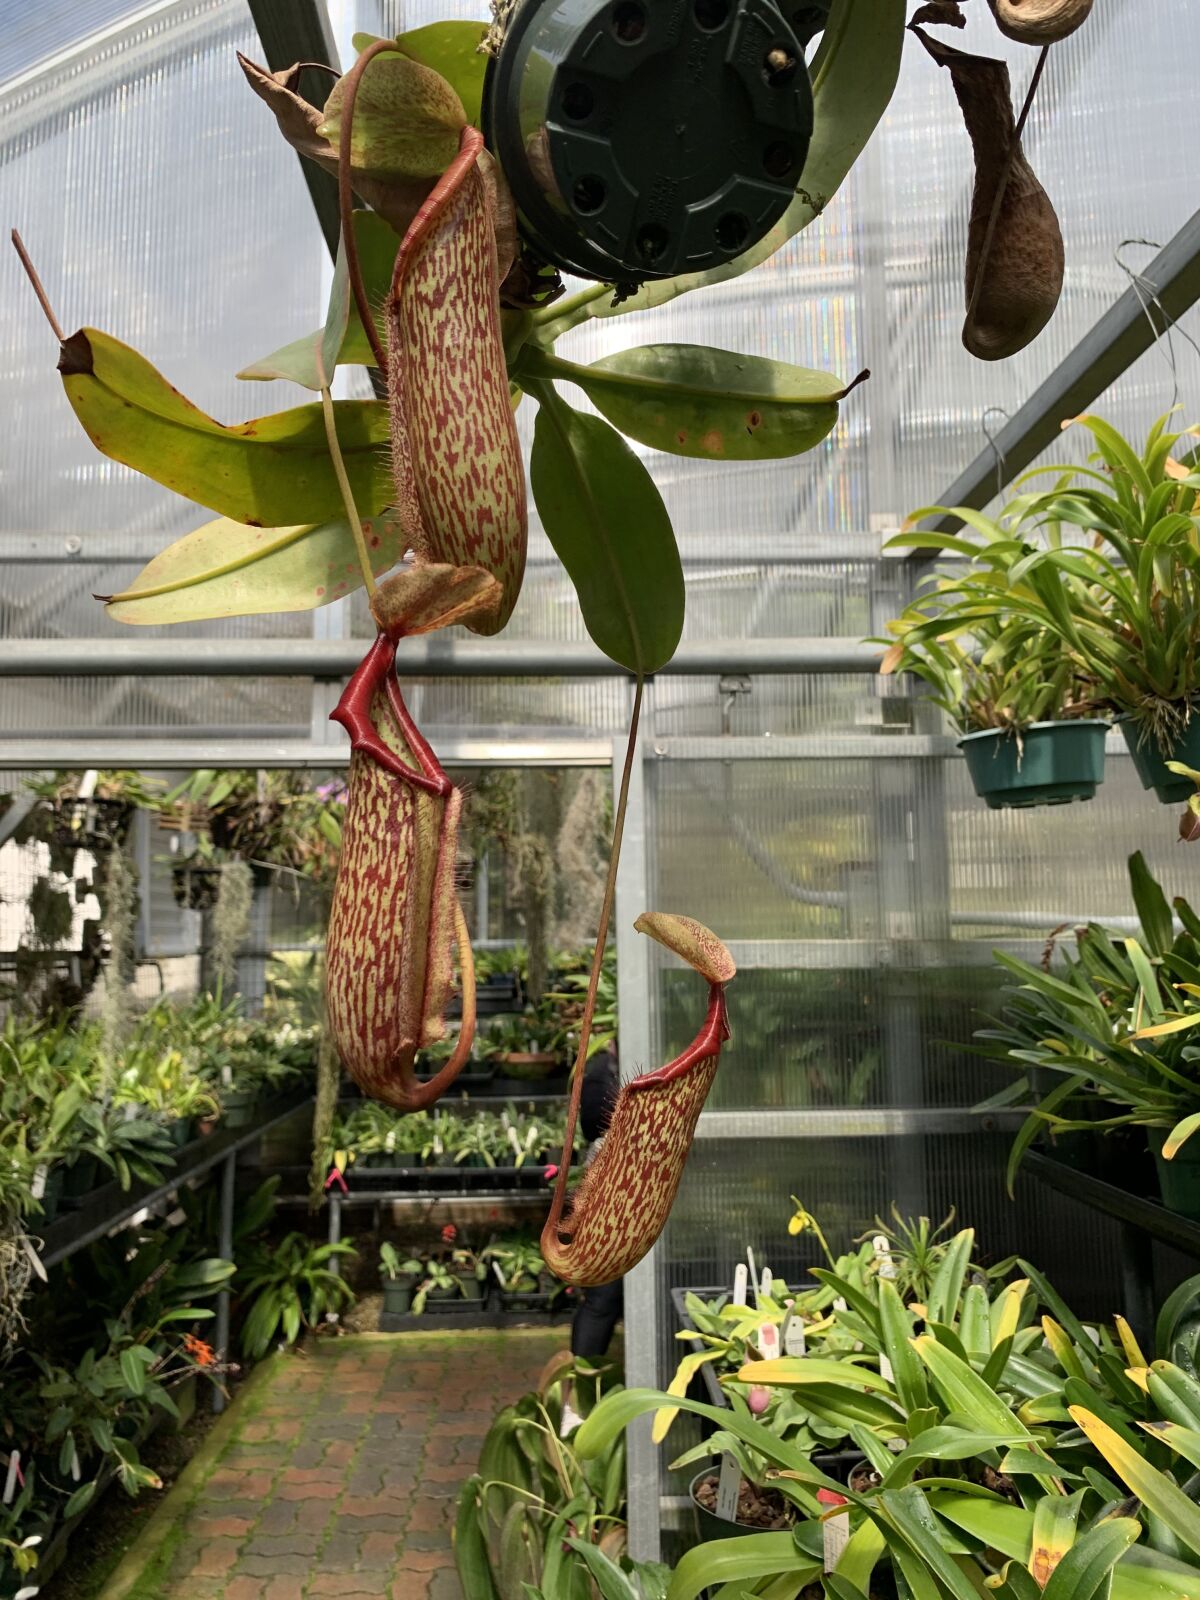 Tropical pitcher plants, which lure insects into their "pitcher"-shape leaves, in a greenhouse at the San Diego Zoo.